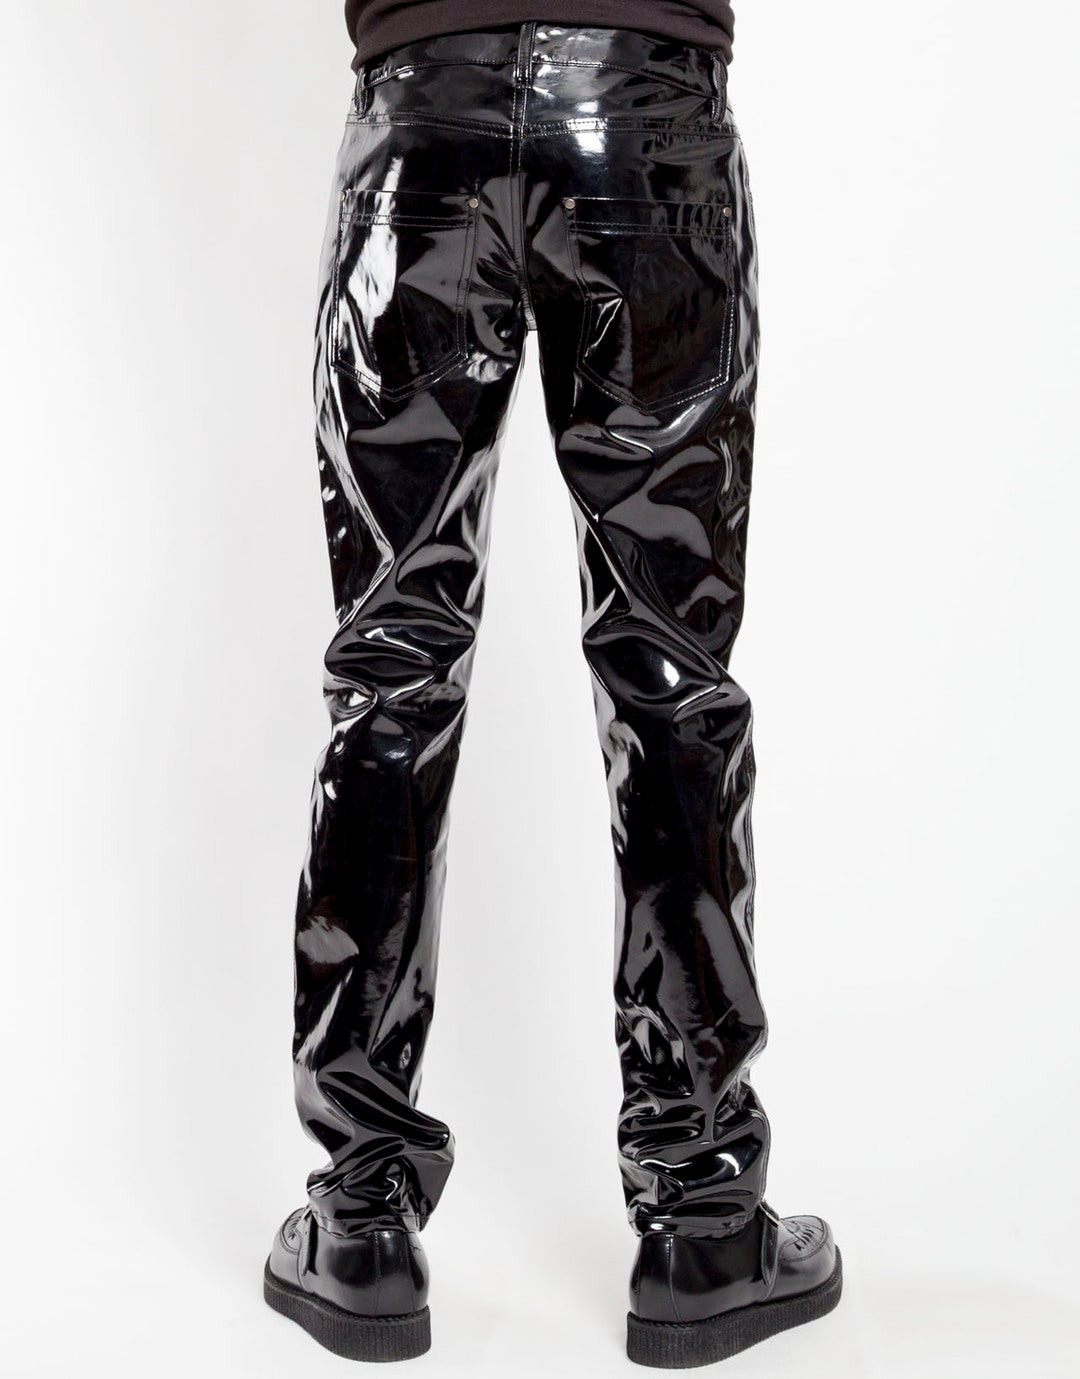 The The Classic Vinyl Pant on a model, rear view.